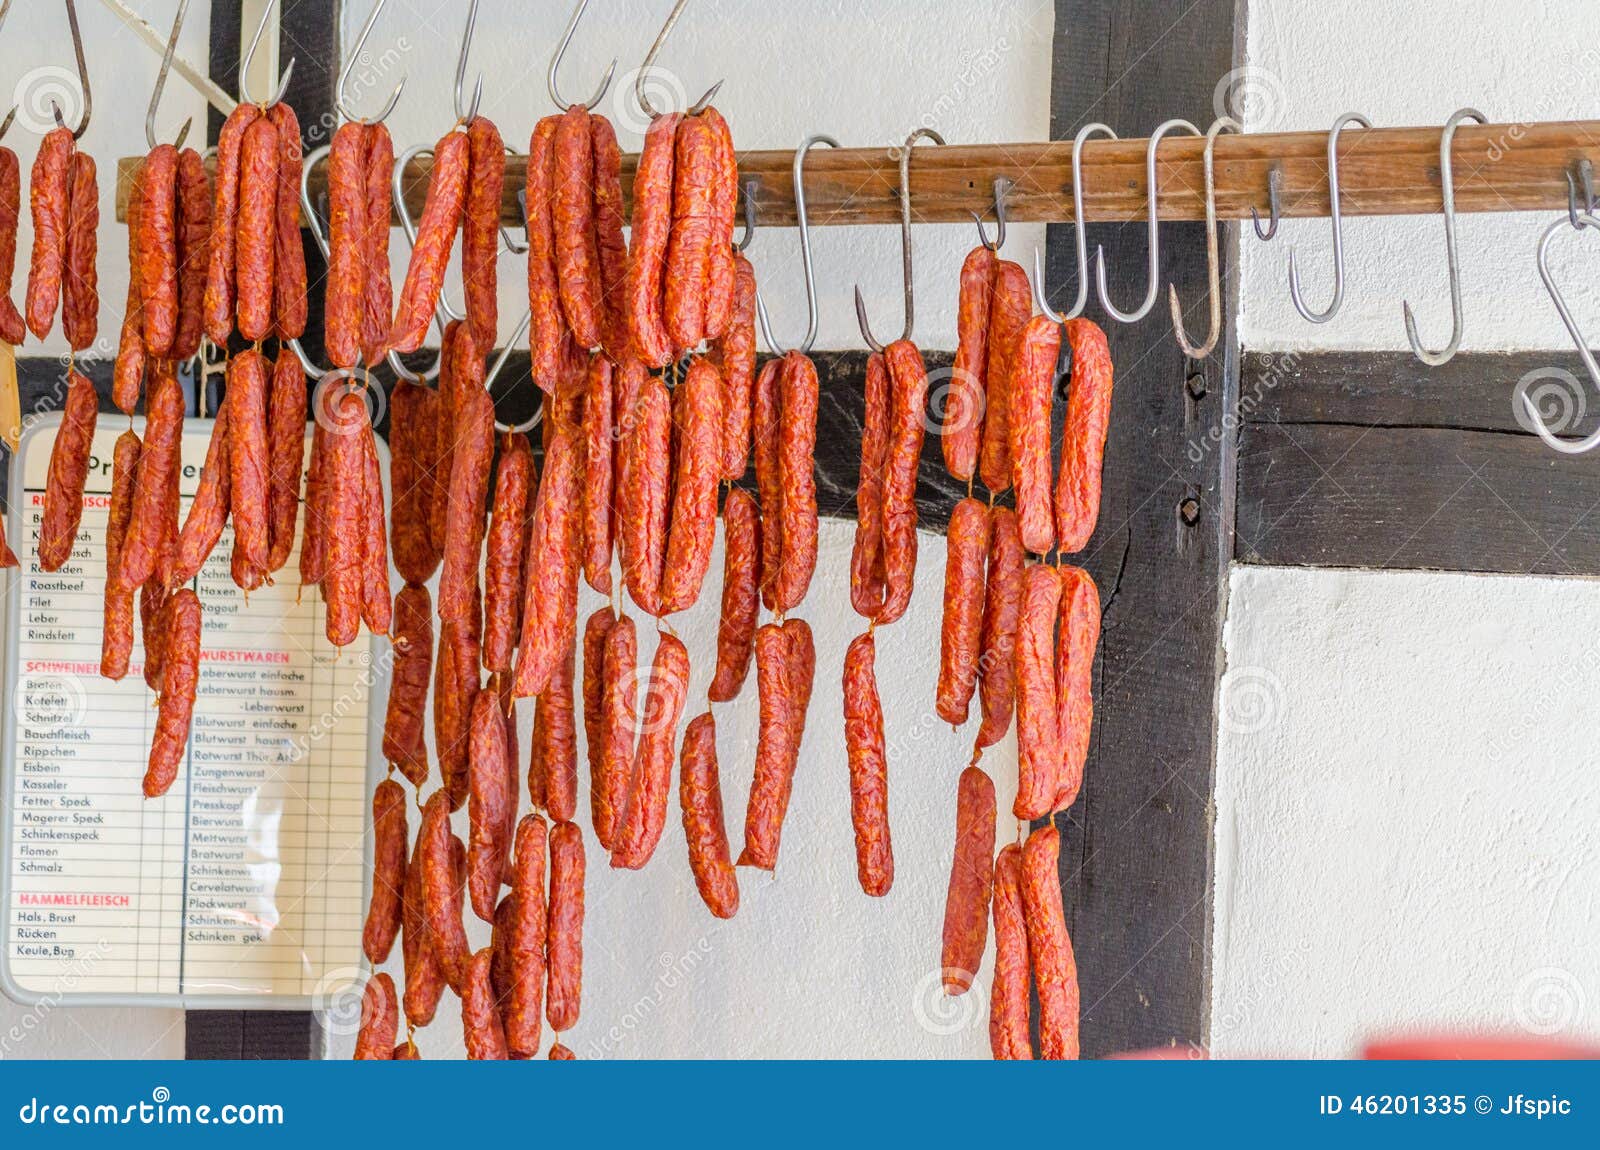 smoked sausages, meats in butcher's shop.